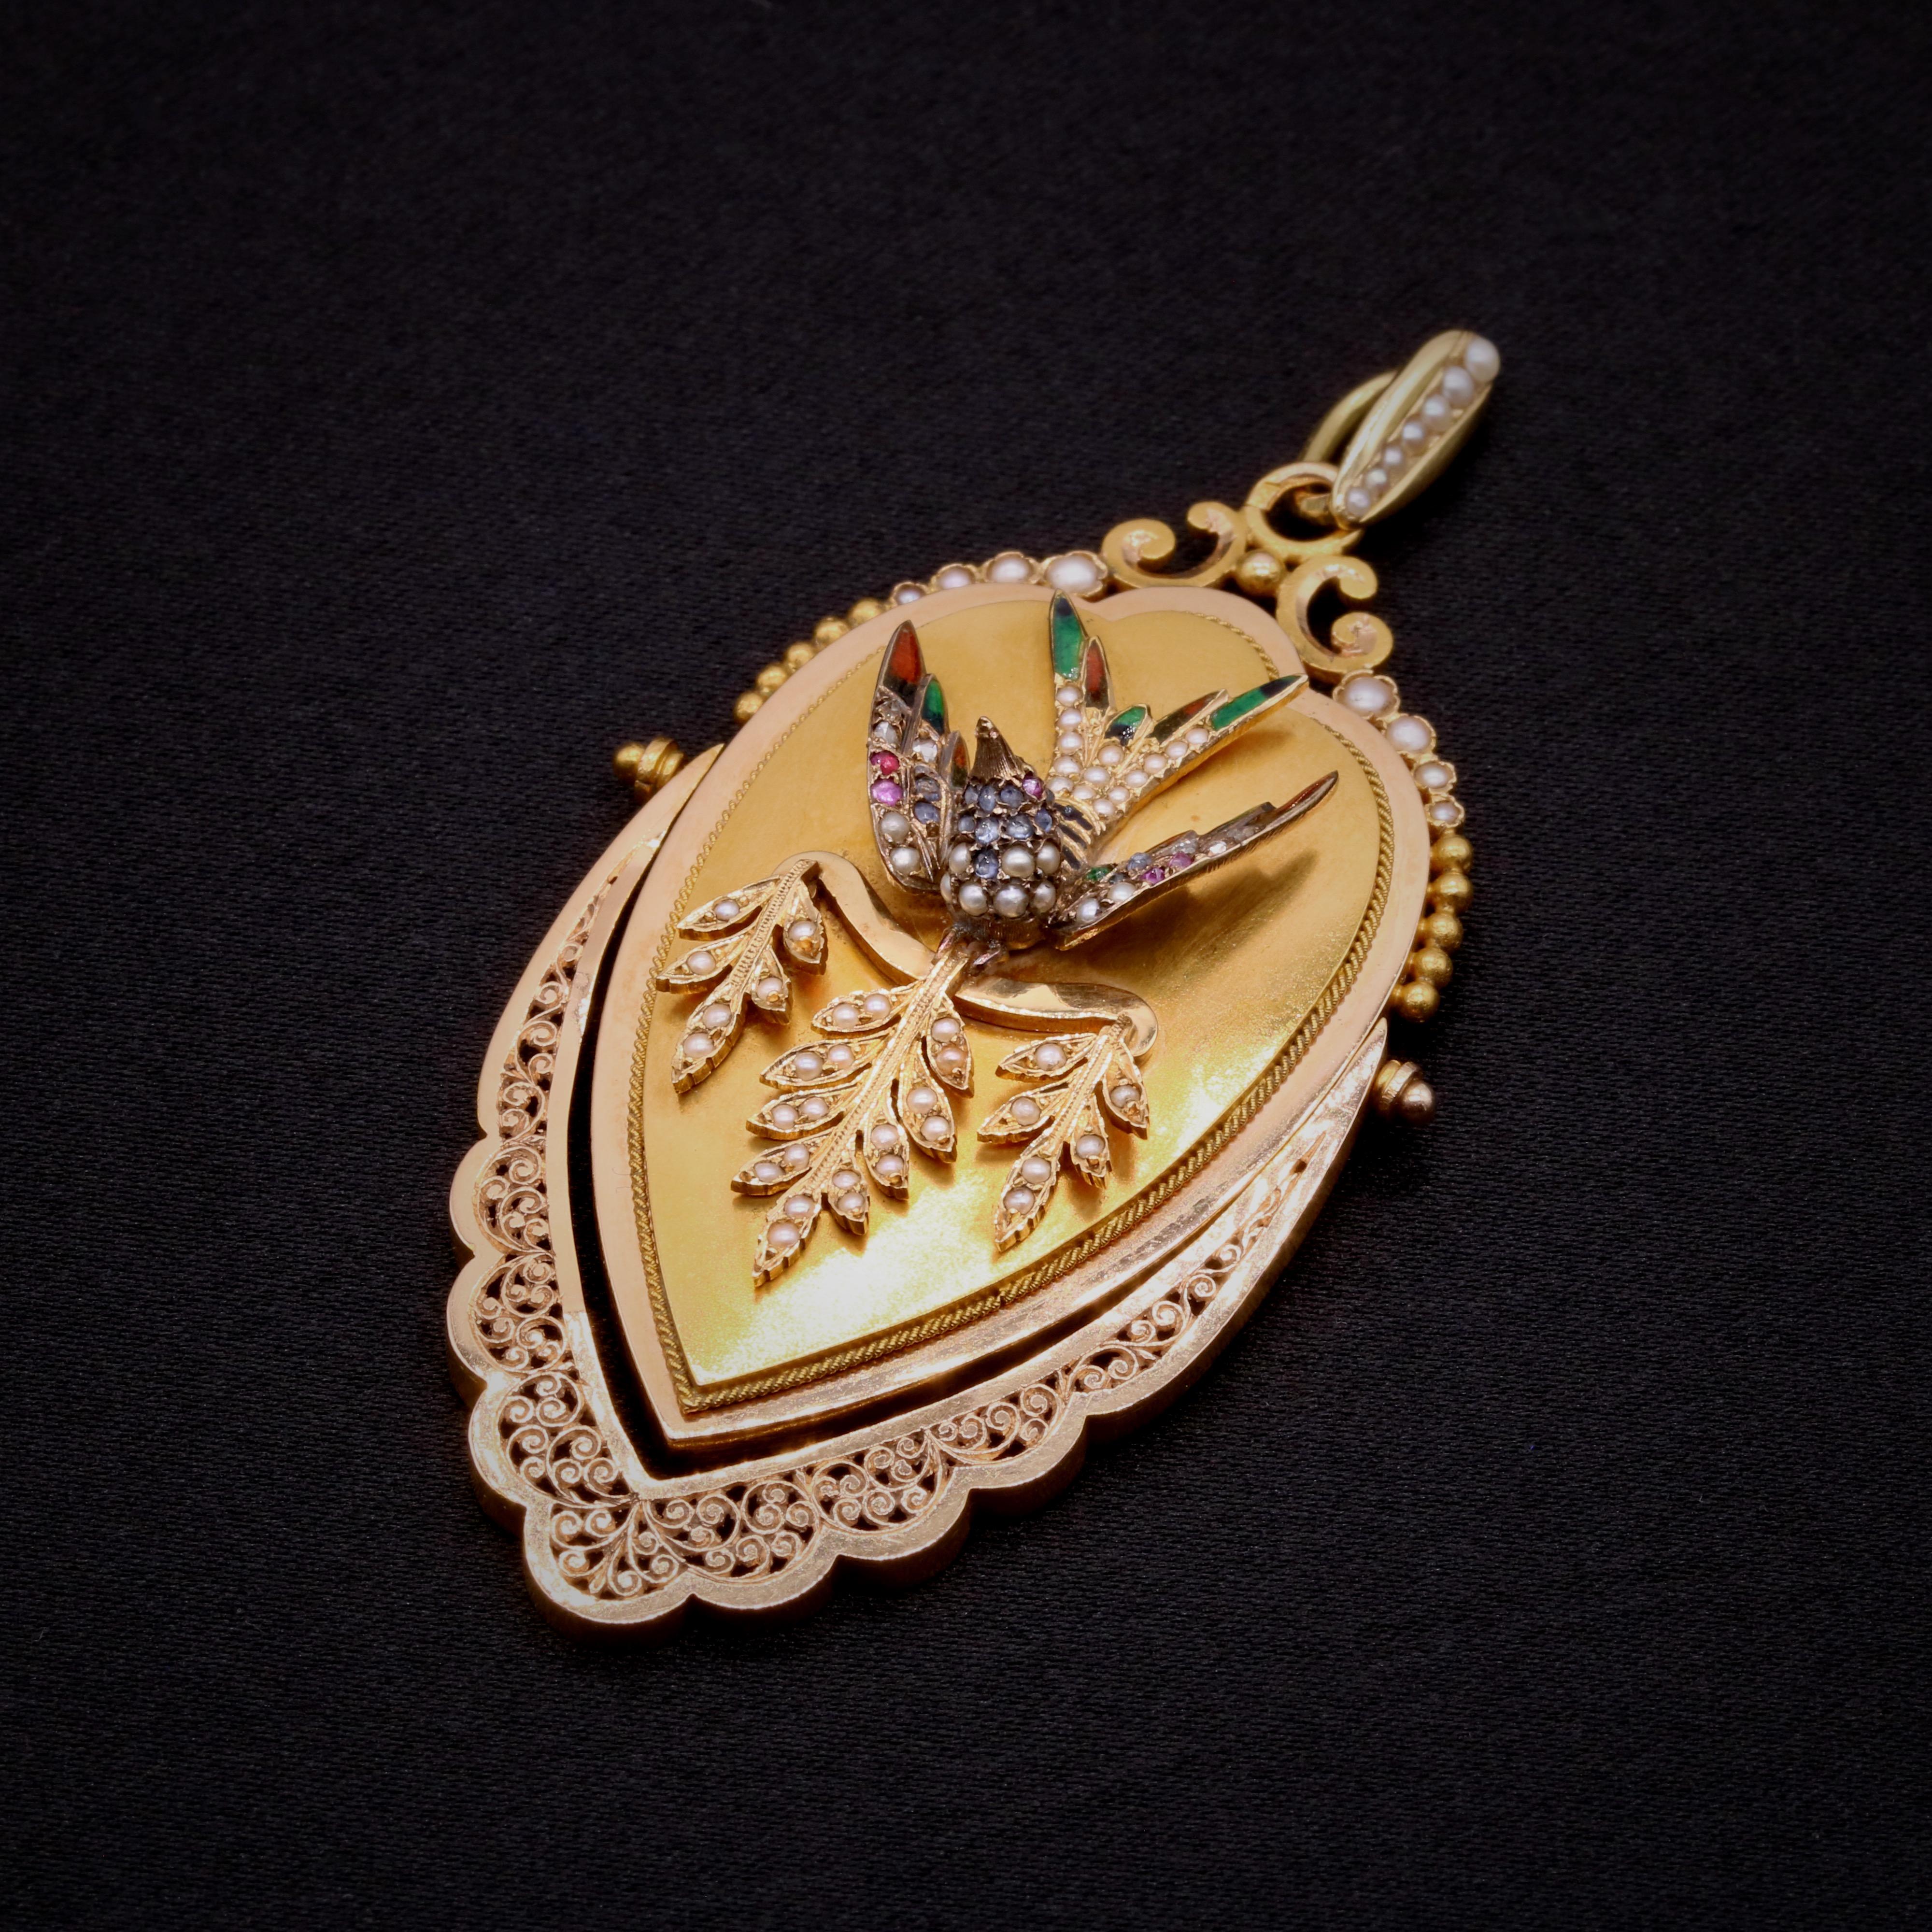 A Victorian pearl, diamond, sapphire, ruby, enamel, and yellow and rose gold locket pendant, comprising seventy-five half seed pearls, 1 whole seed pearl, six round cut rubies, six rose cut diamonds, sixteen round cut sapphires, and multicoloured